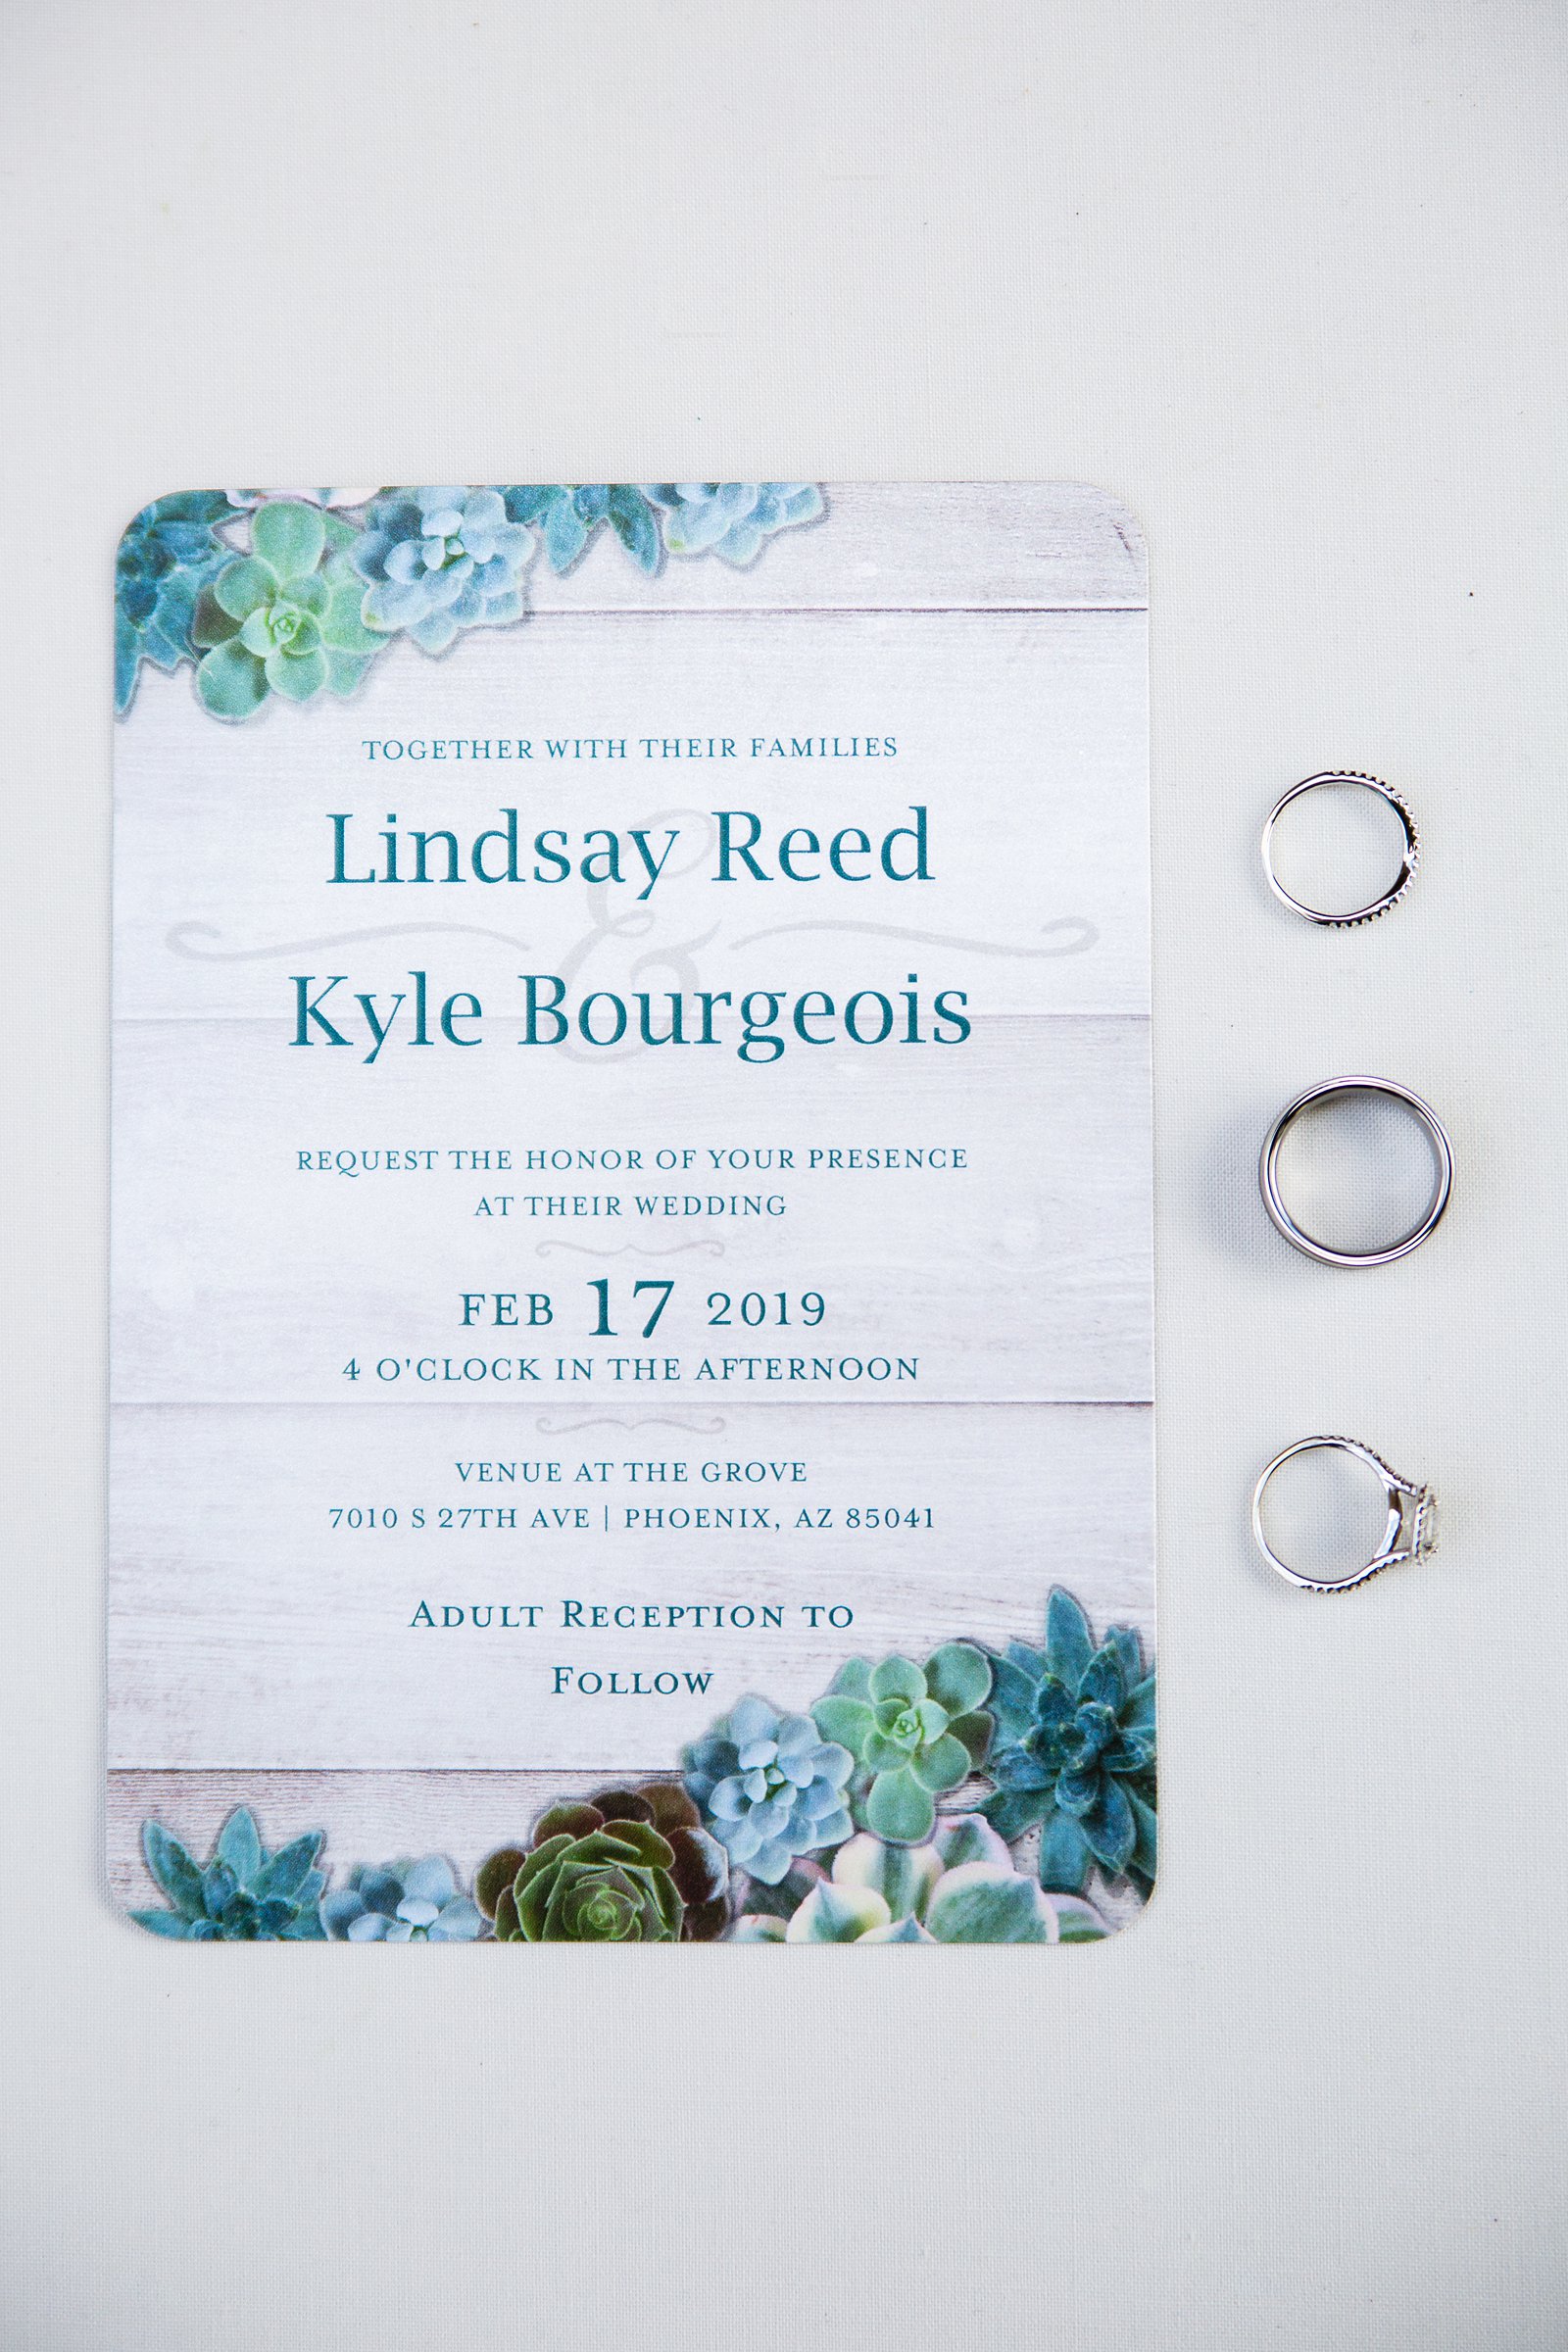 Rustic succulent wedding invitations with wedding rings by PMA Photography.